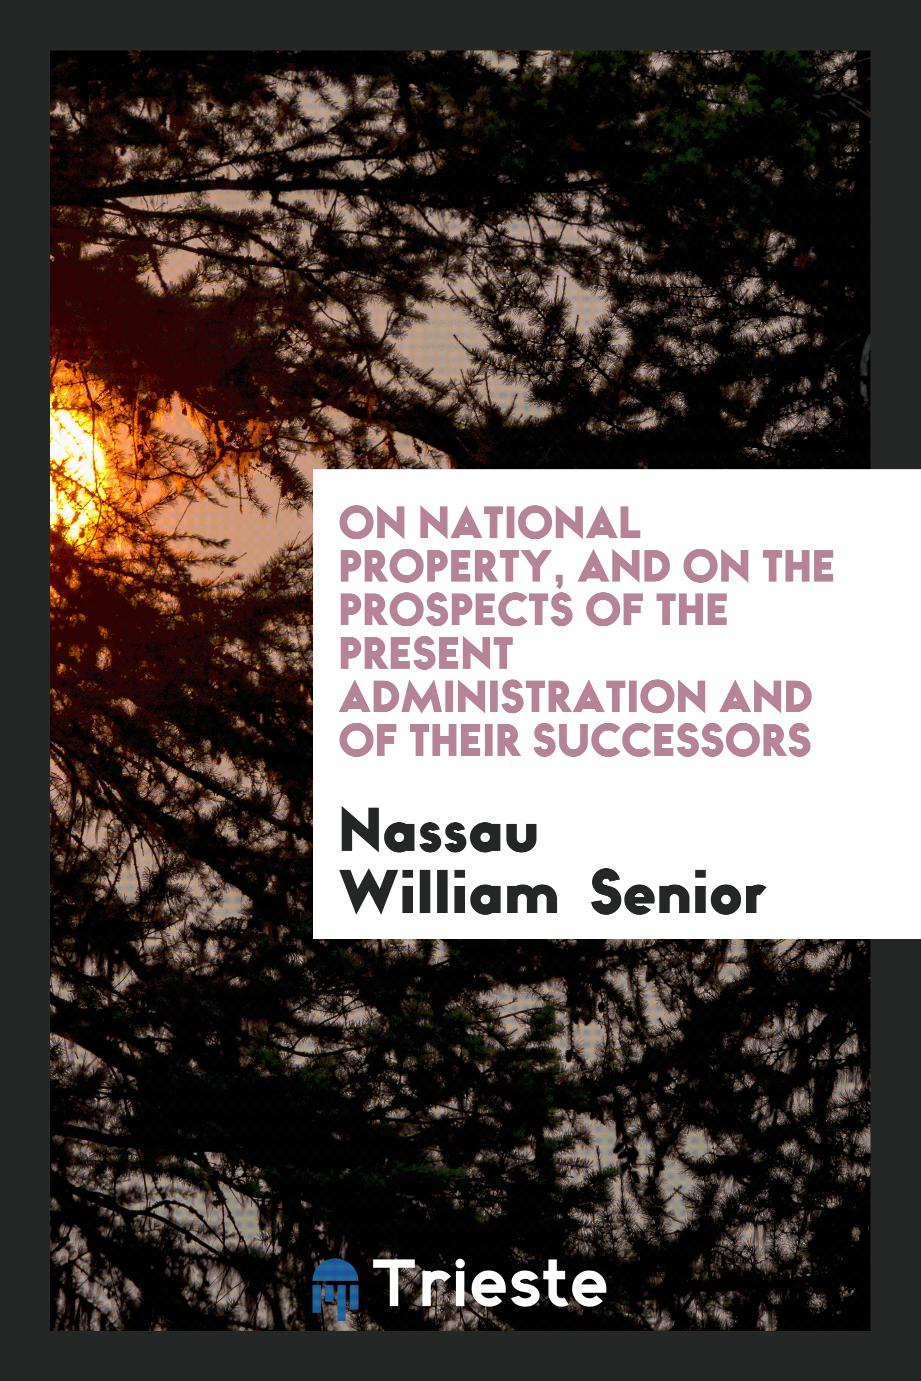 On National Property, and on the Prospects of the Present Administration and of Their Successors